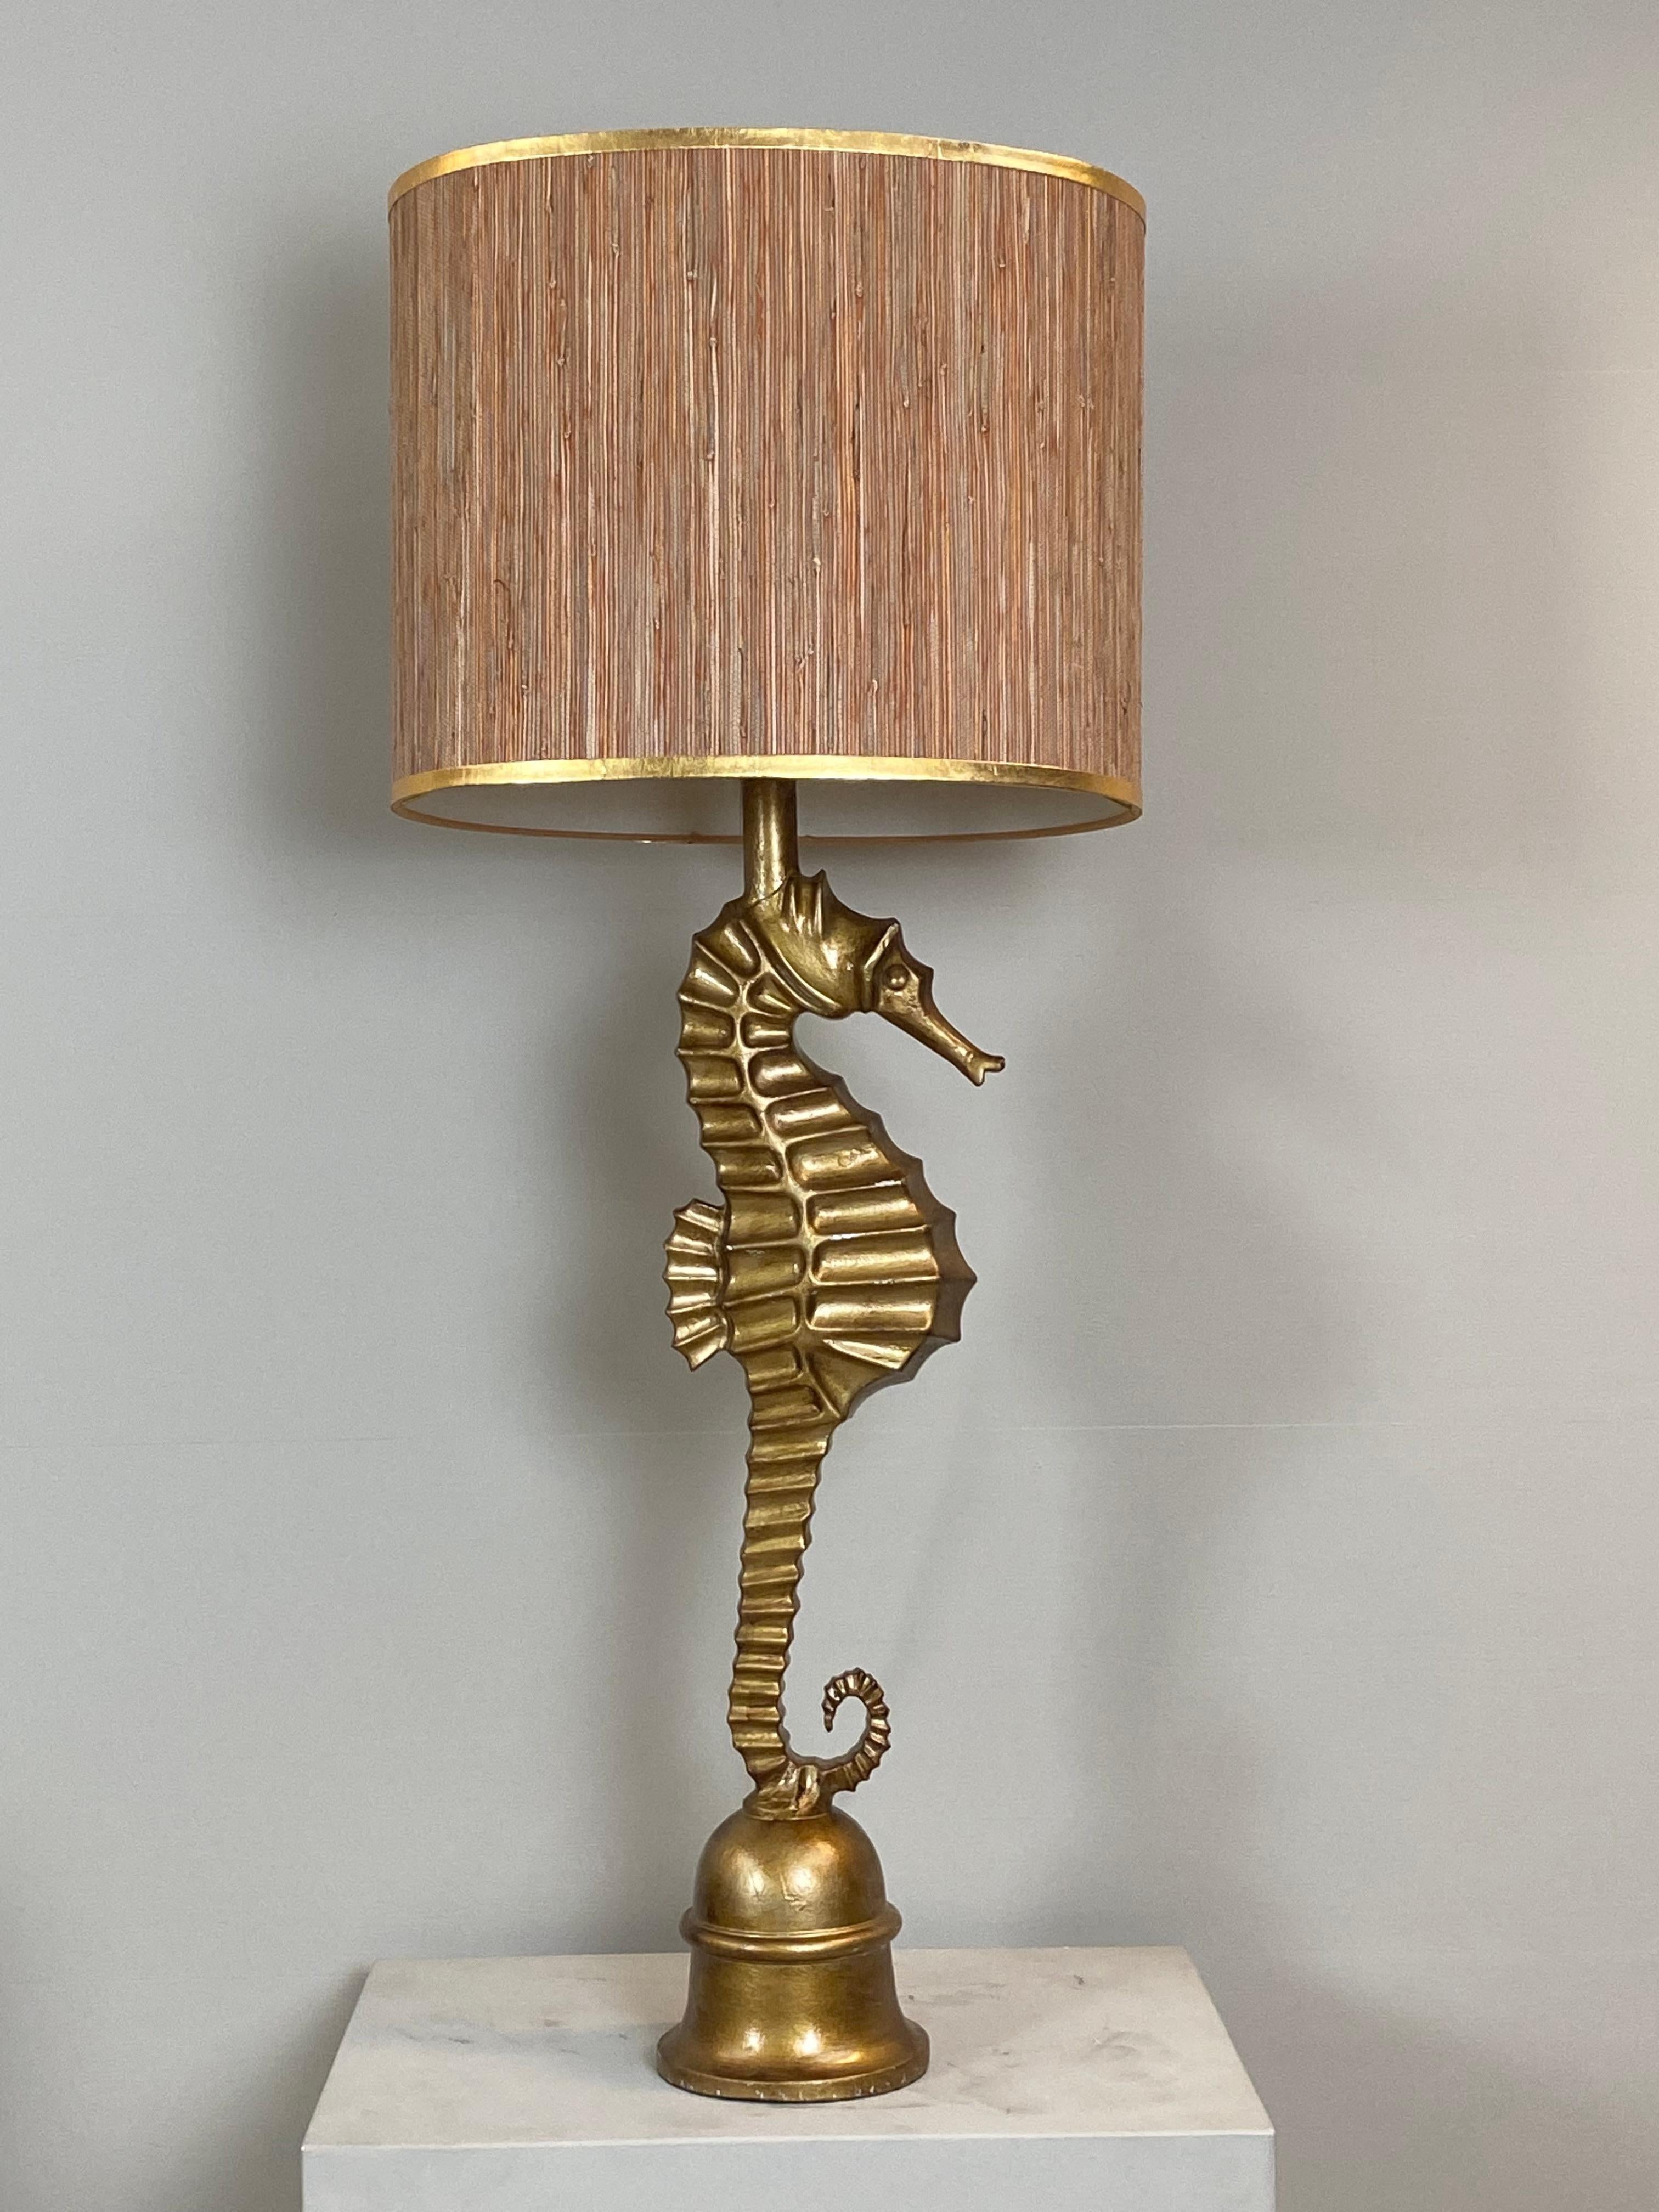 Exceptional Pair of Table lamps from France,Saint-Tropez,
In the form of Sea Horses,
New Hand Made Lamp Shades.